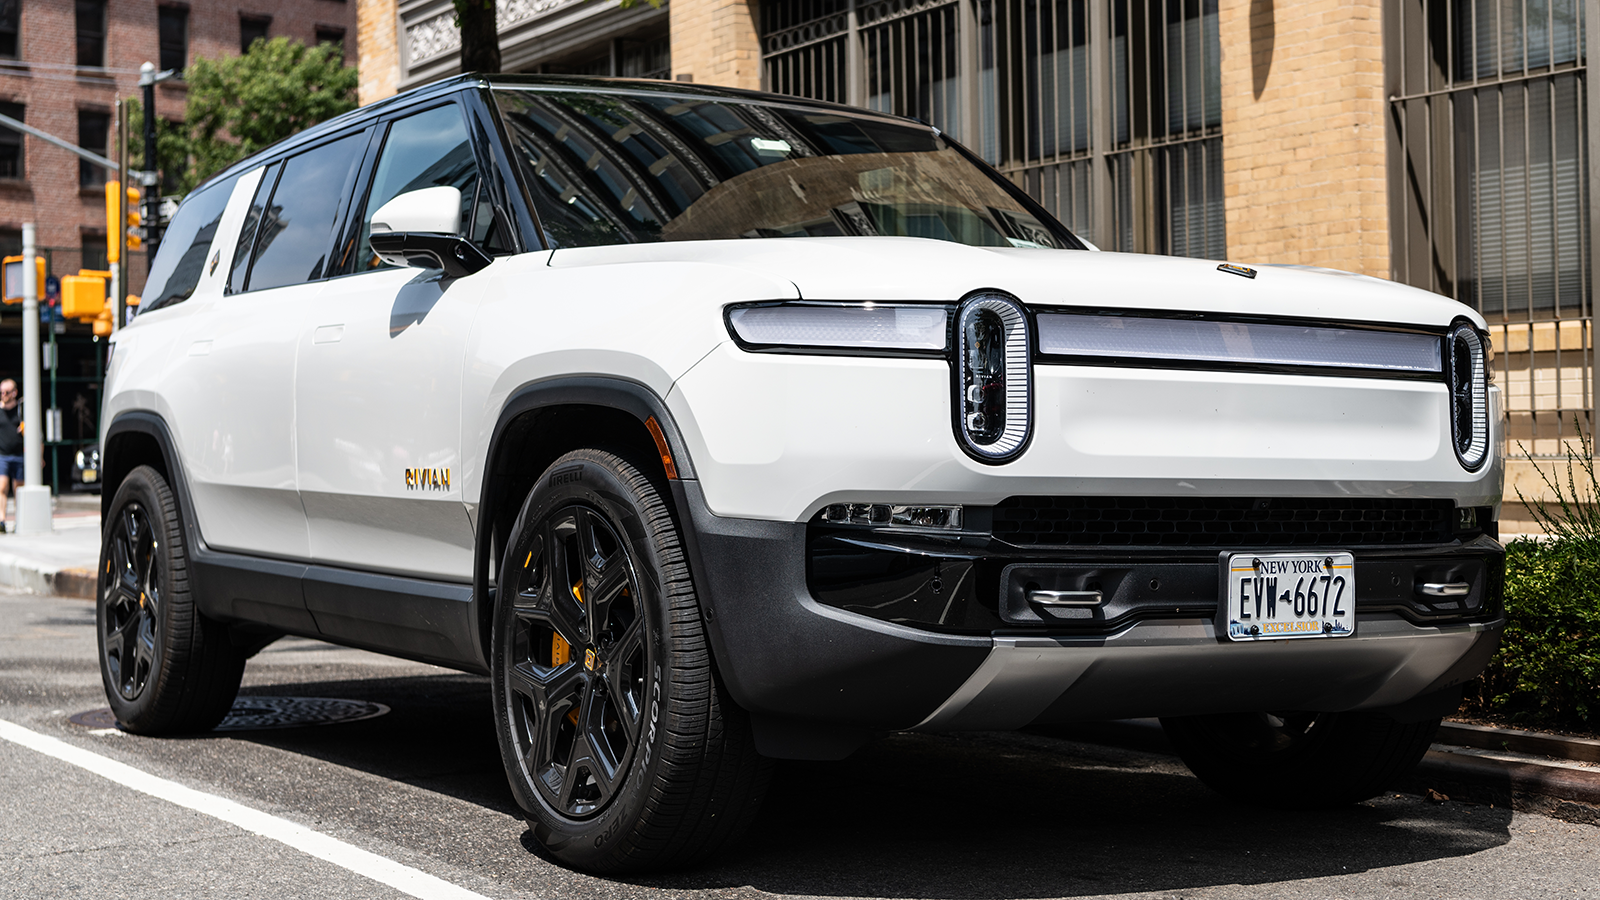 Volkswagen and Rivian sign $5bn deal to share EV architecture and software